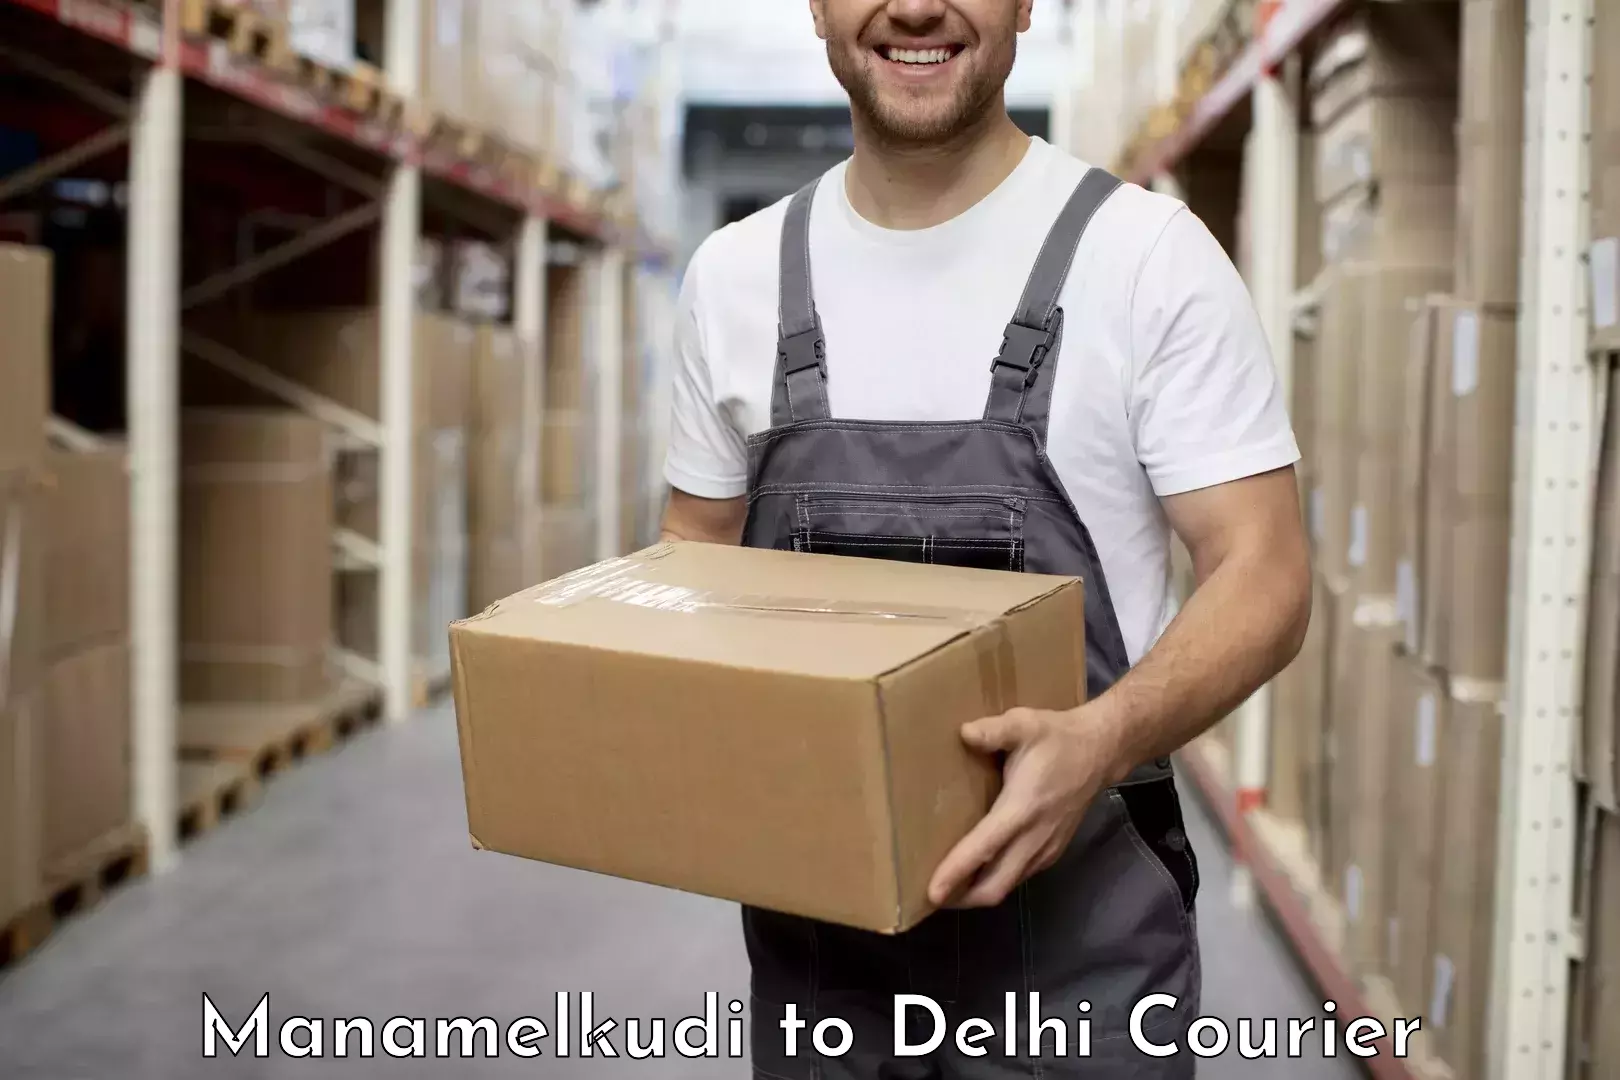 Tailored shipping services Manamelkudi to NCR